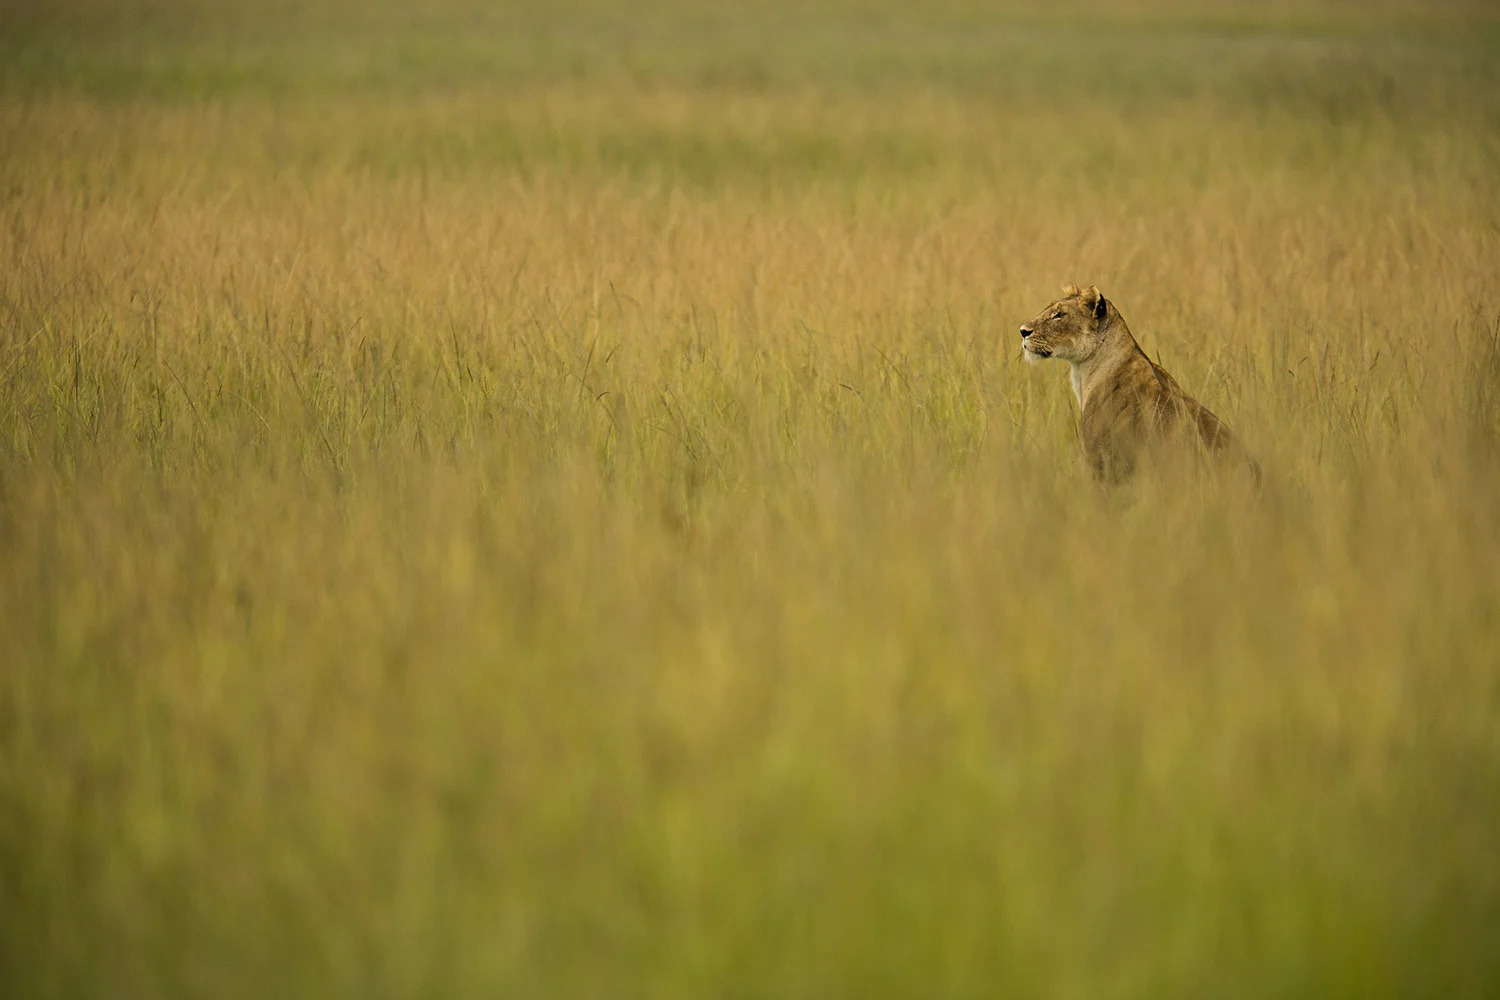 Lioness in yellow grass